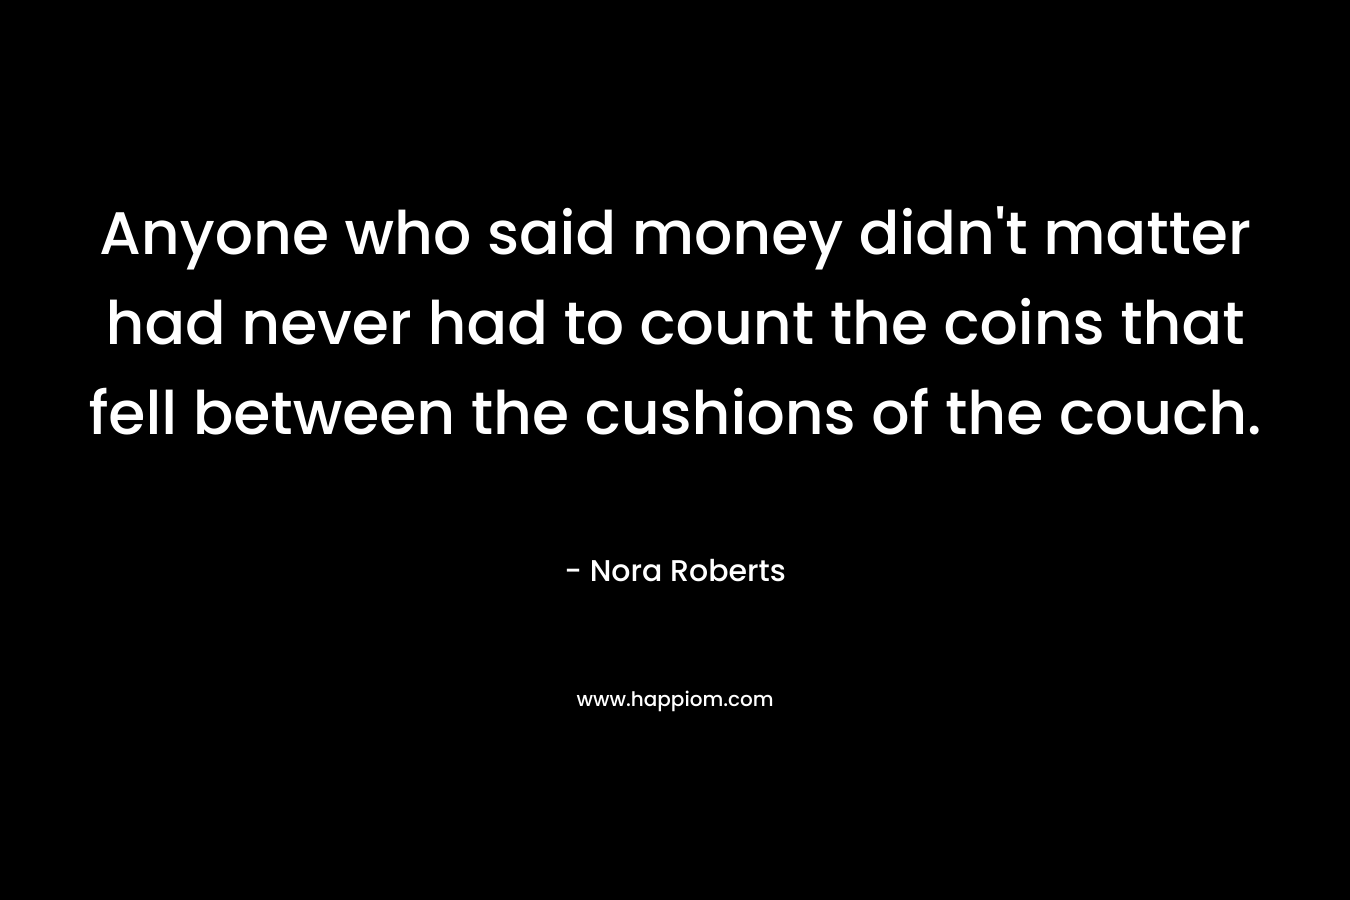 Anyone who said money didn't matter had never had to count the coins that fell between the cushions of the couch.